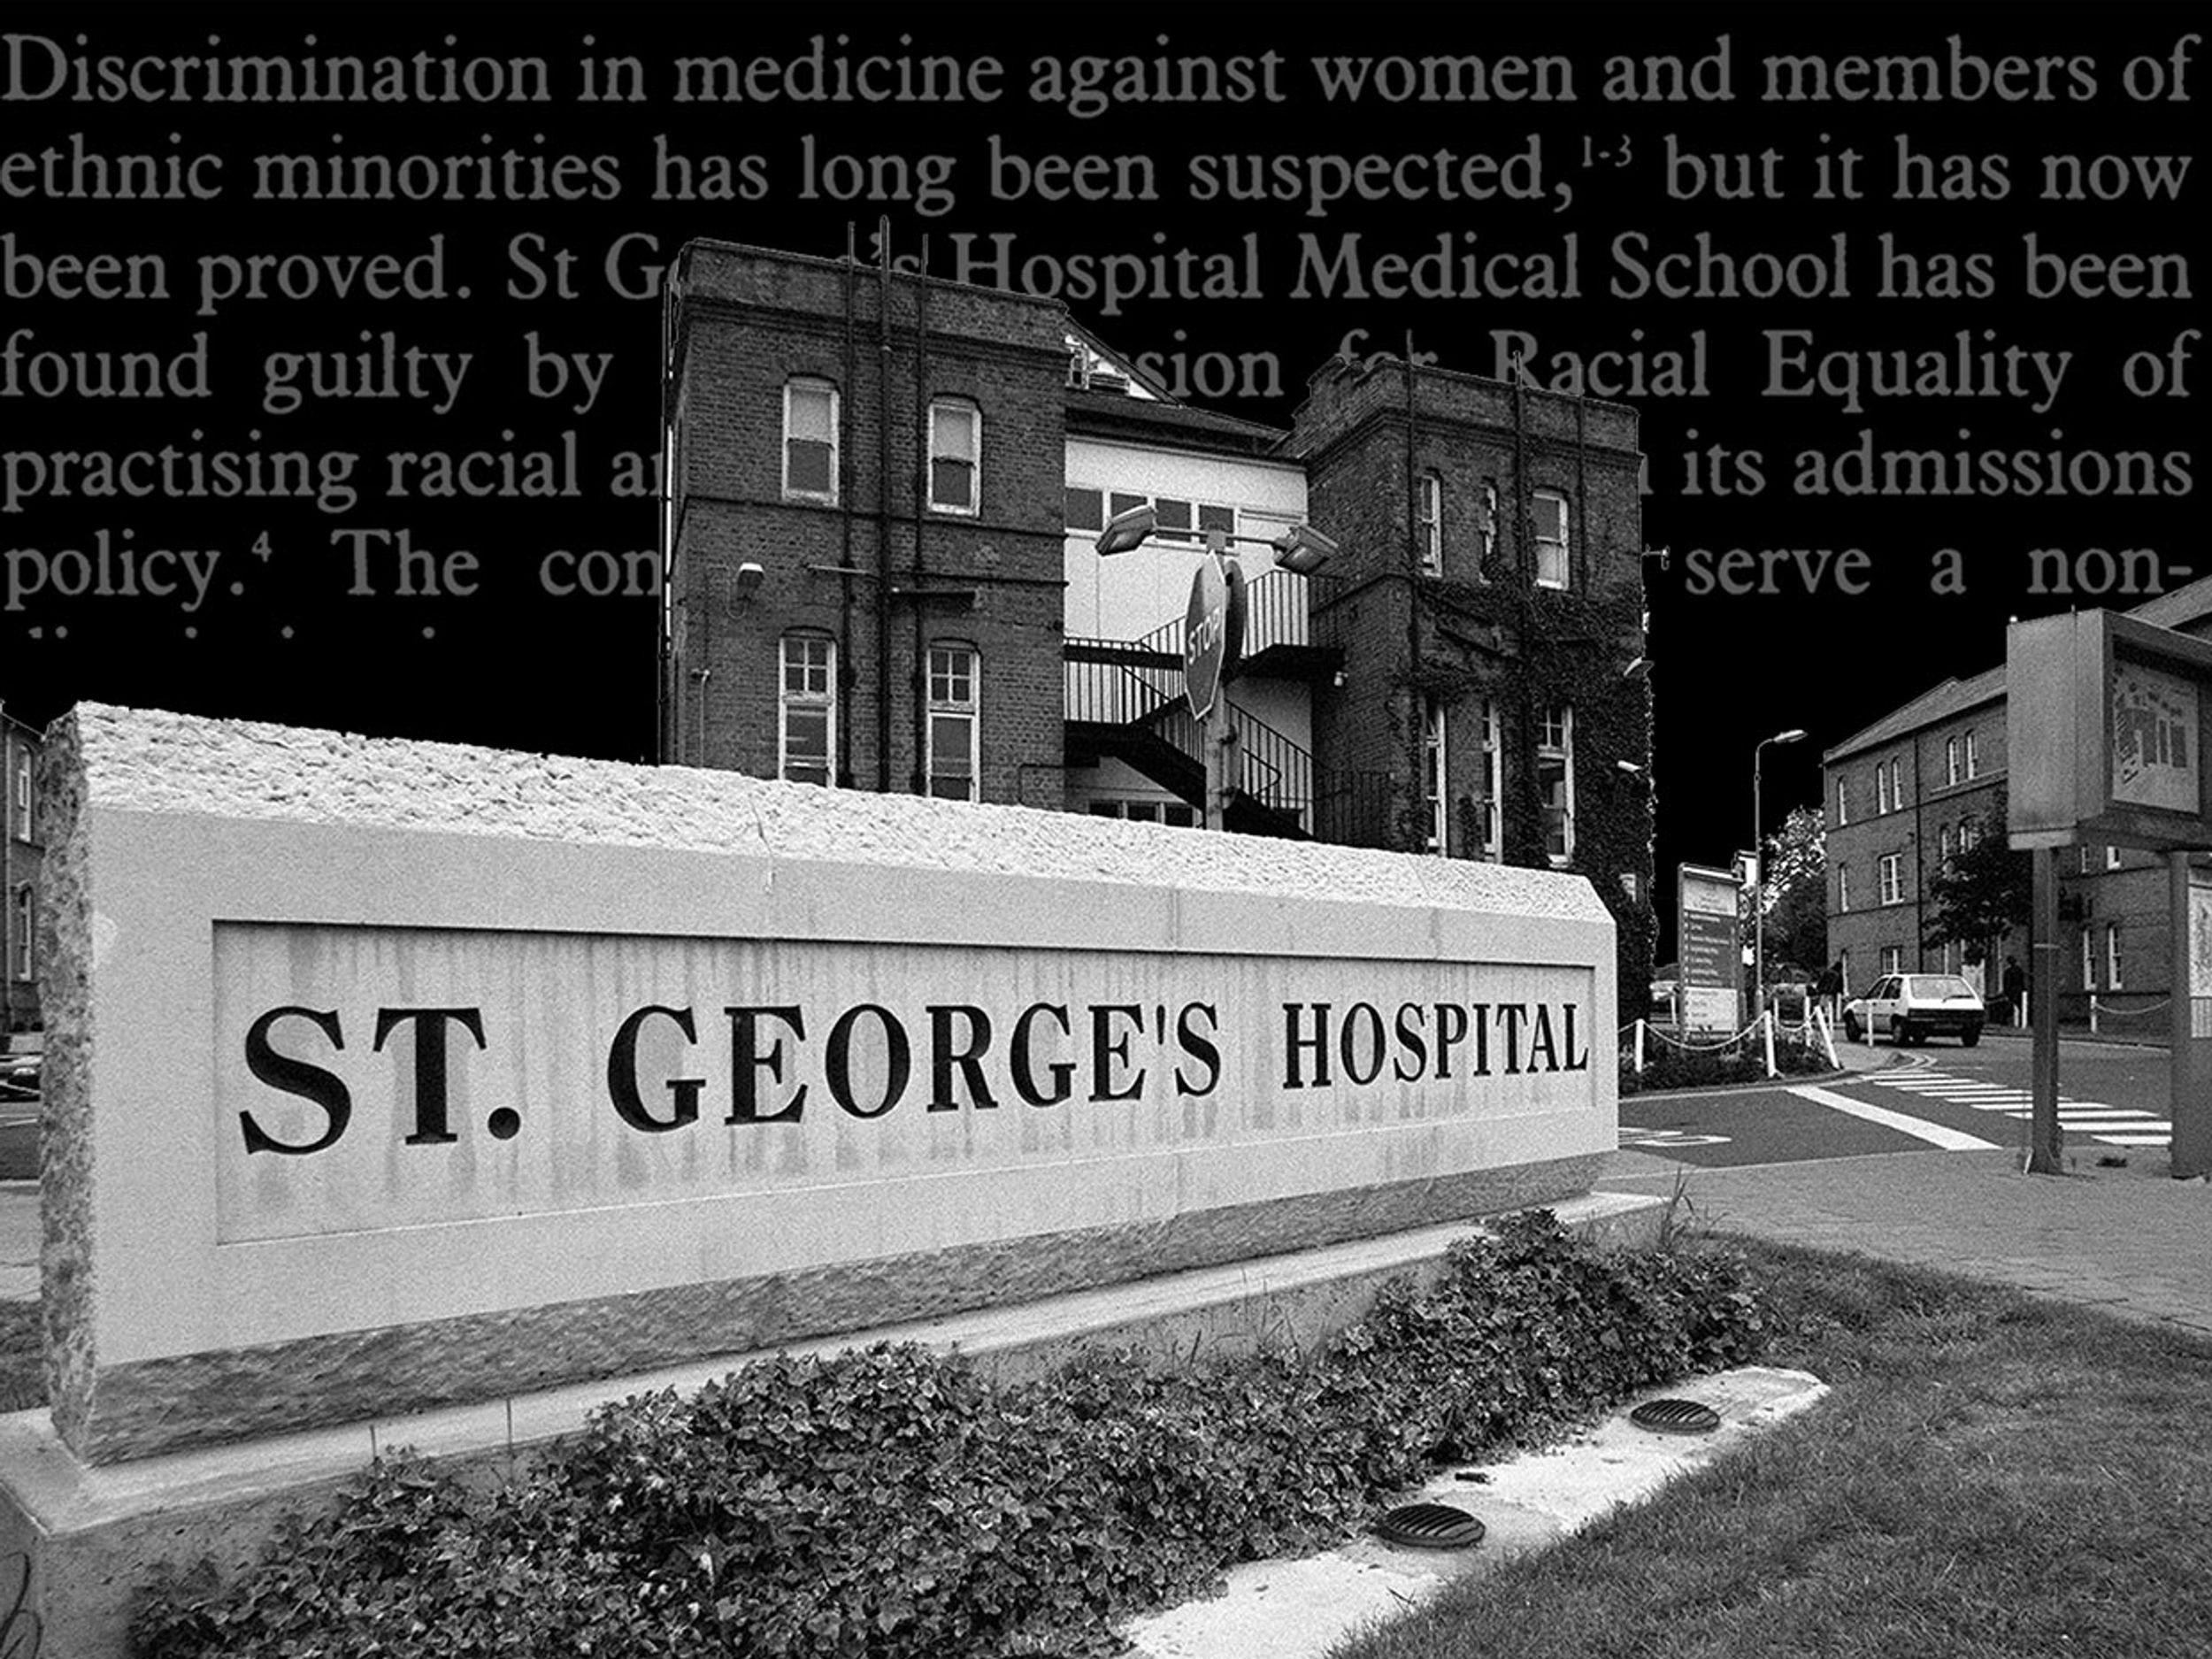 Photo-illustration of the exterior of St. George’s Hospital Medical School with text relating to the case.